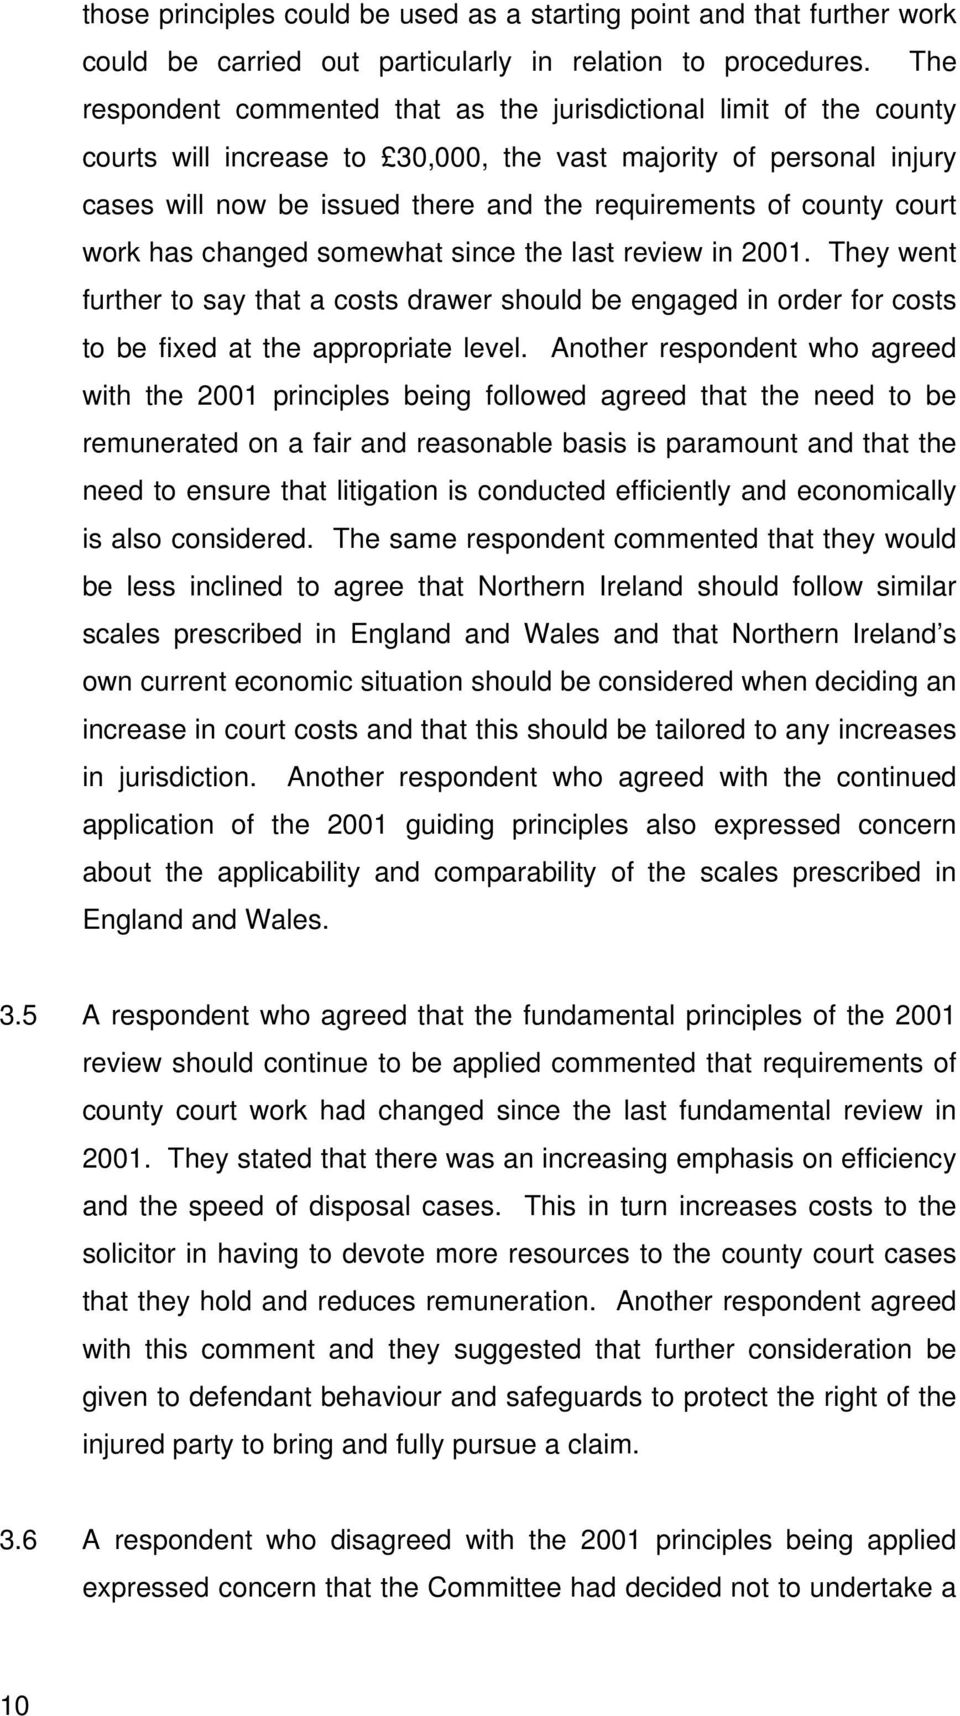 county court work has changed somewhat since the last review in 2001. They went further to say that a costs drawer should be engaged in order for costs to be fixed at the appropriate level.